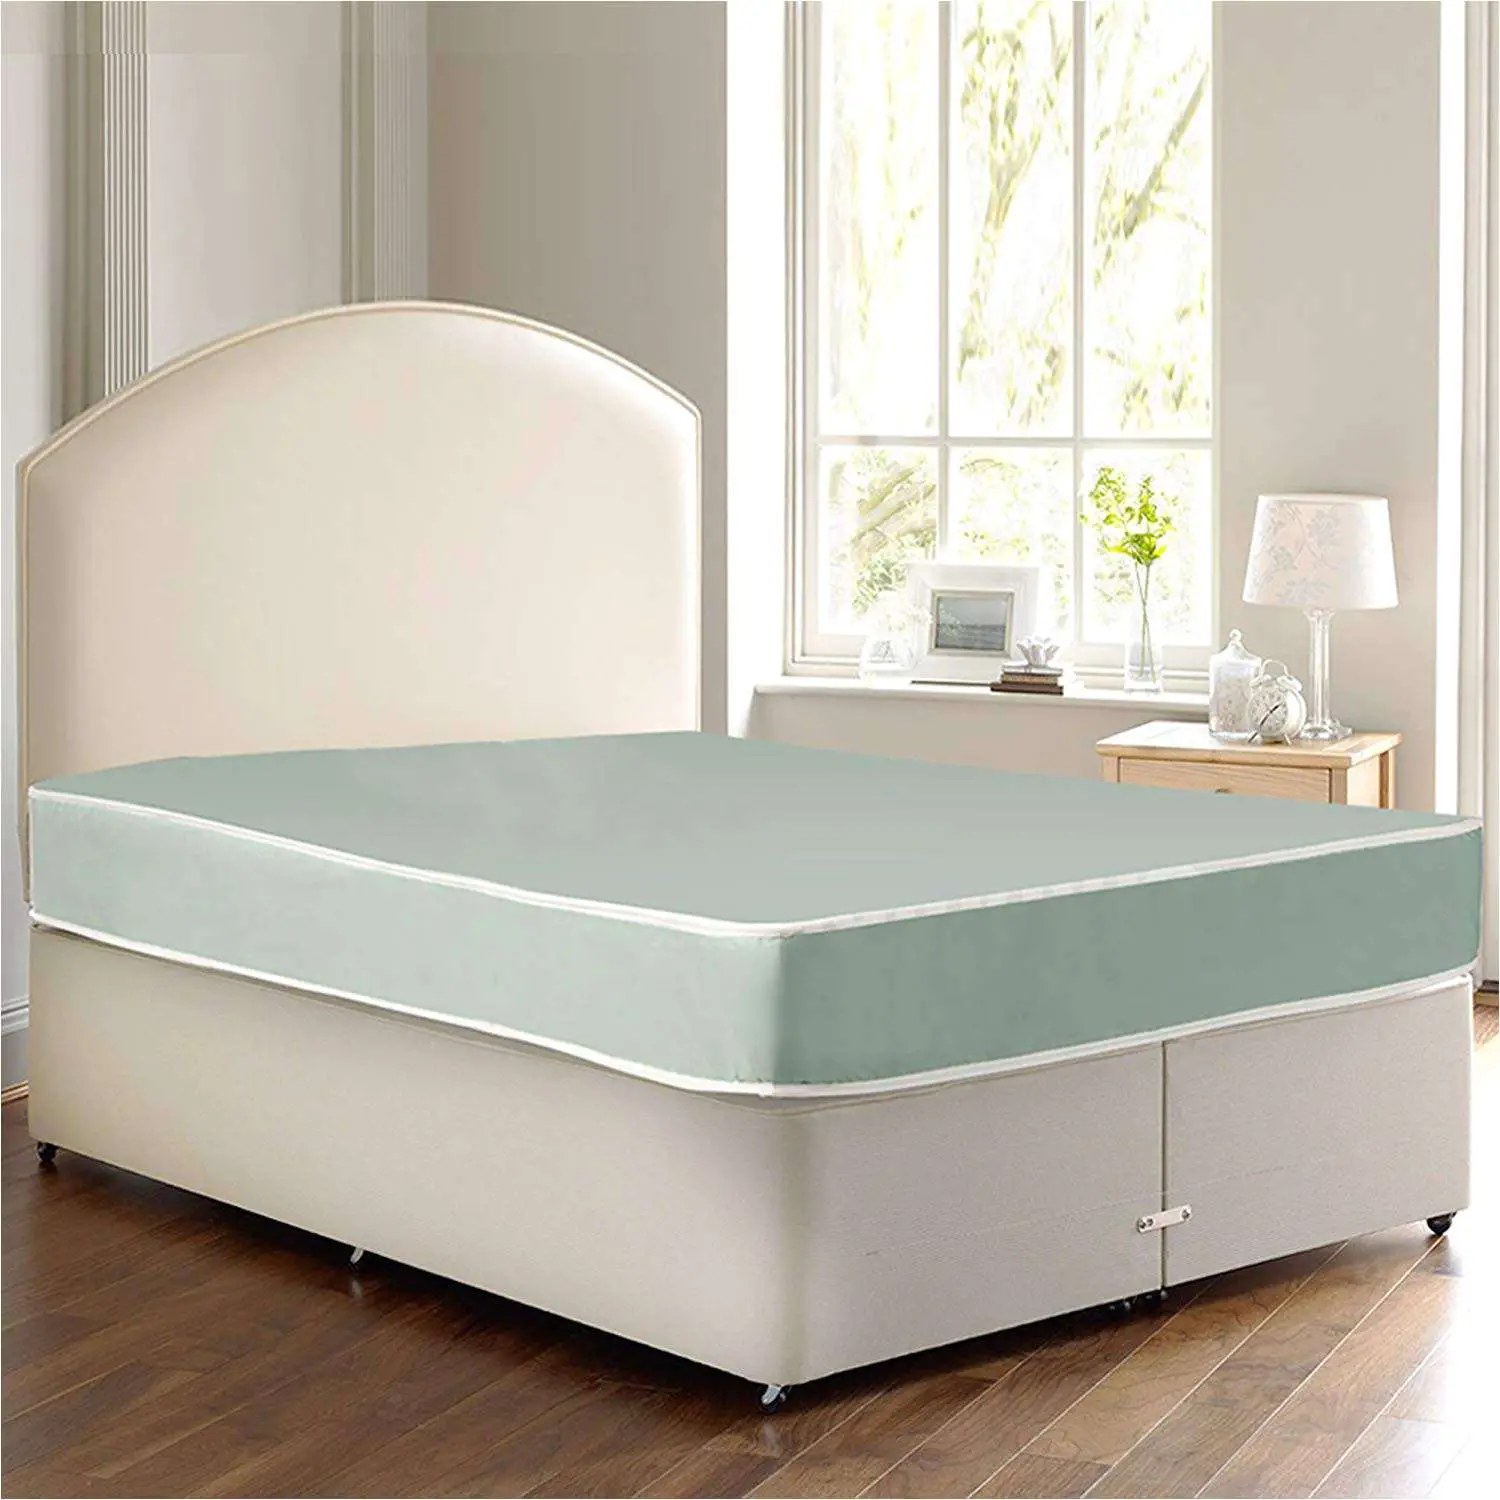 Sleep Number Bed Frame Disassembly Amazon Com Mattress ...